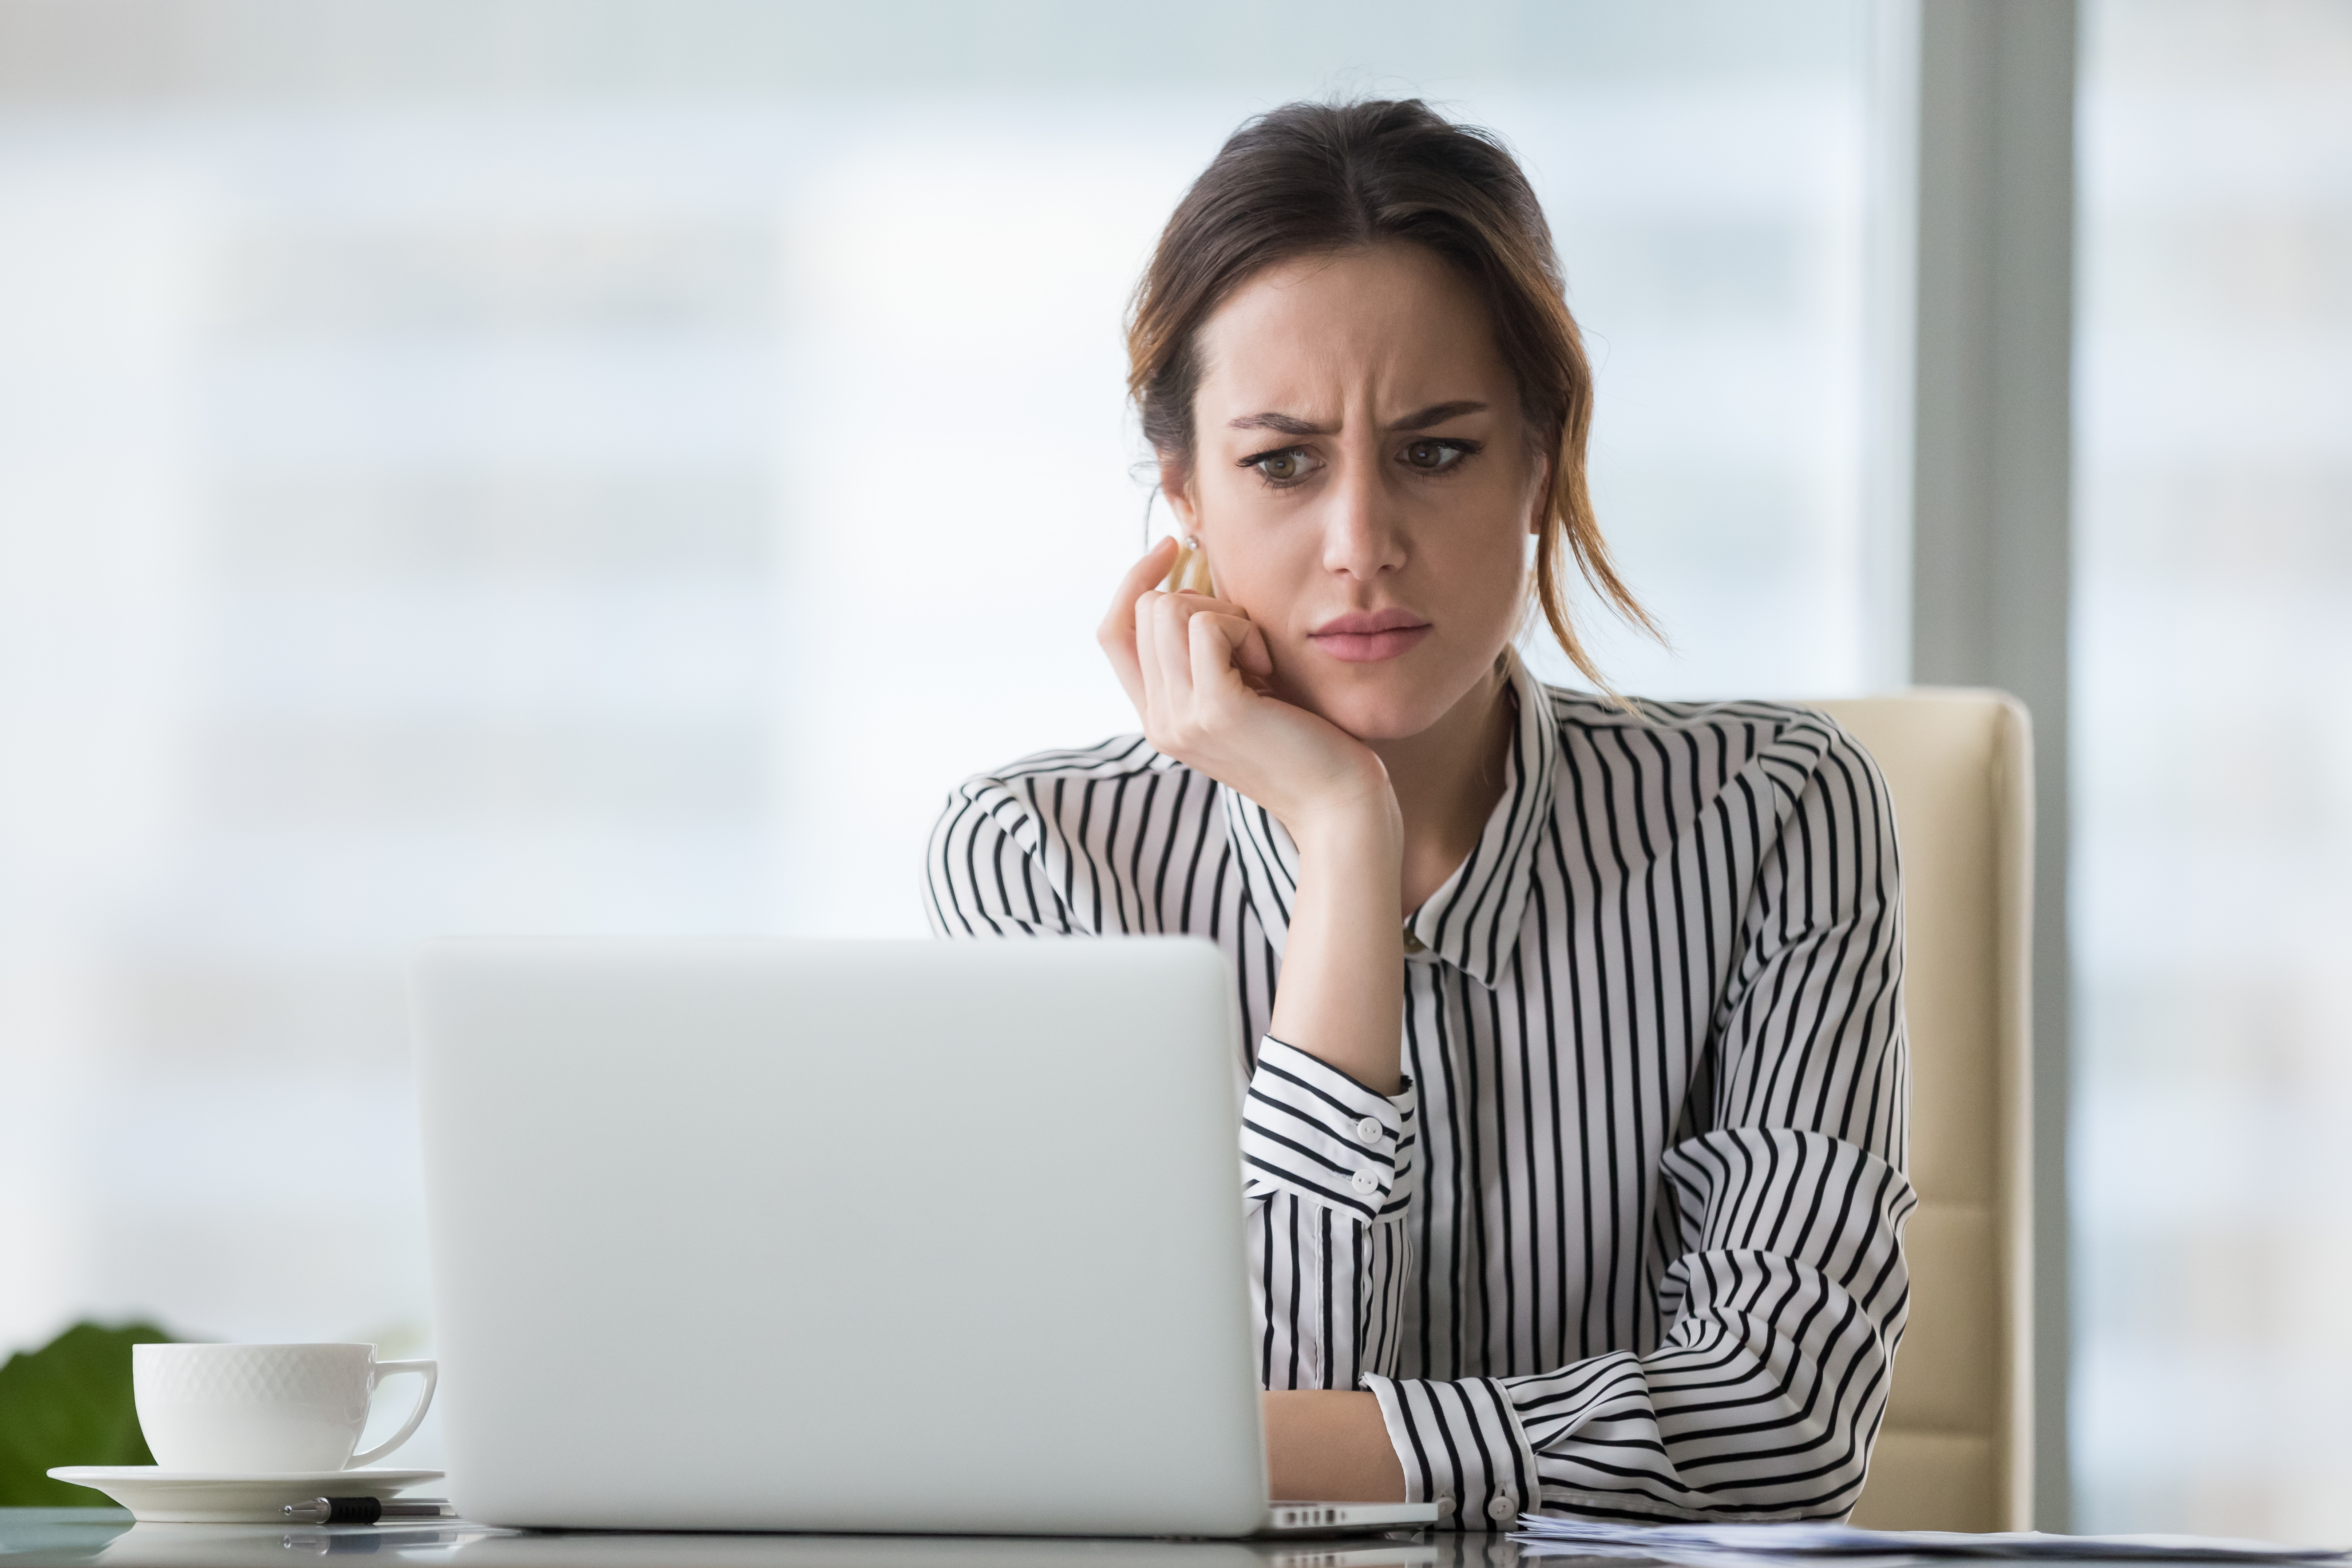 Young professional white woman looking at a laptop screen with a confused expression